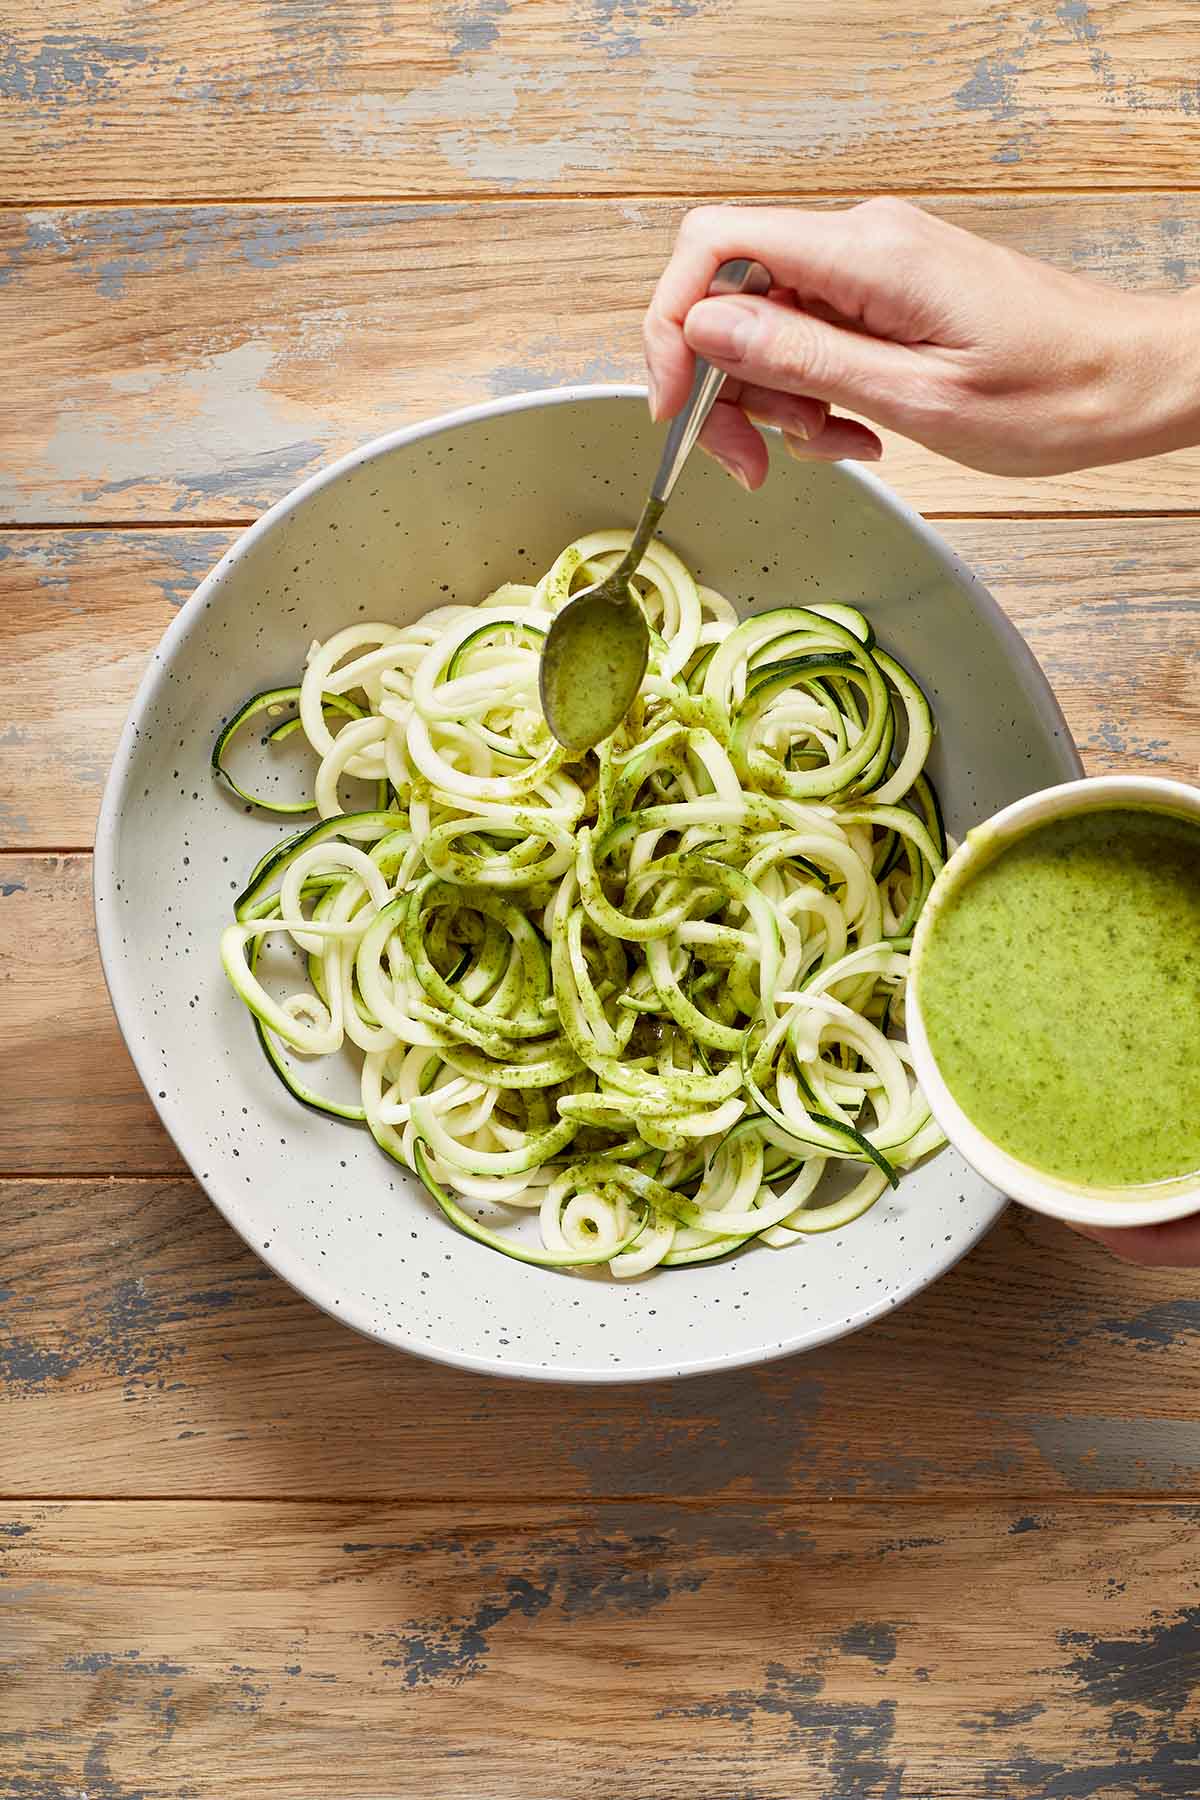 Zucchini noodles in a large bowl with jalapeño vinaigrette being drizzled over them with a spoon.